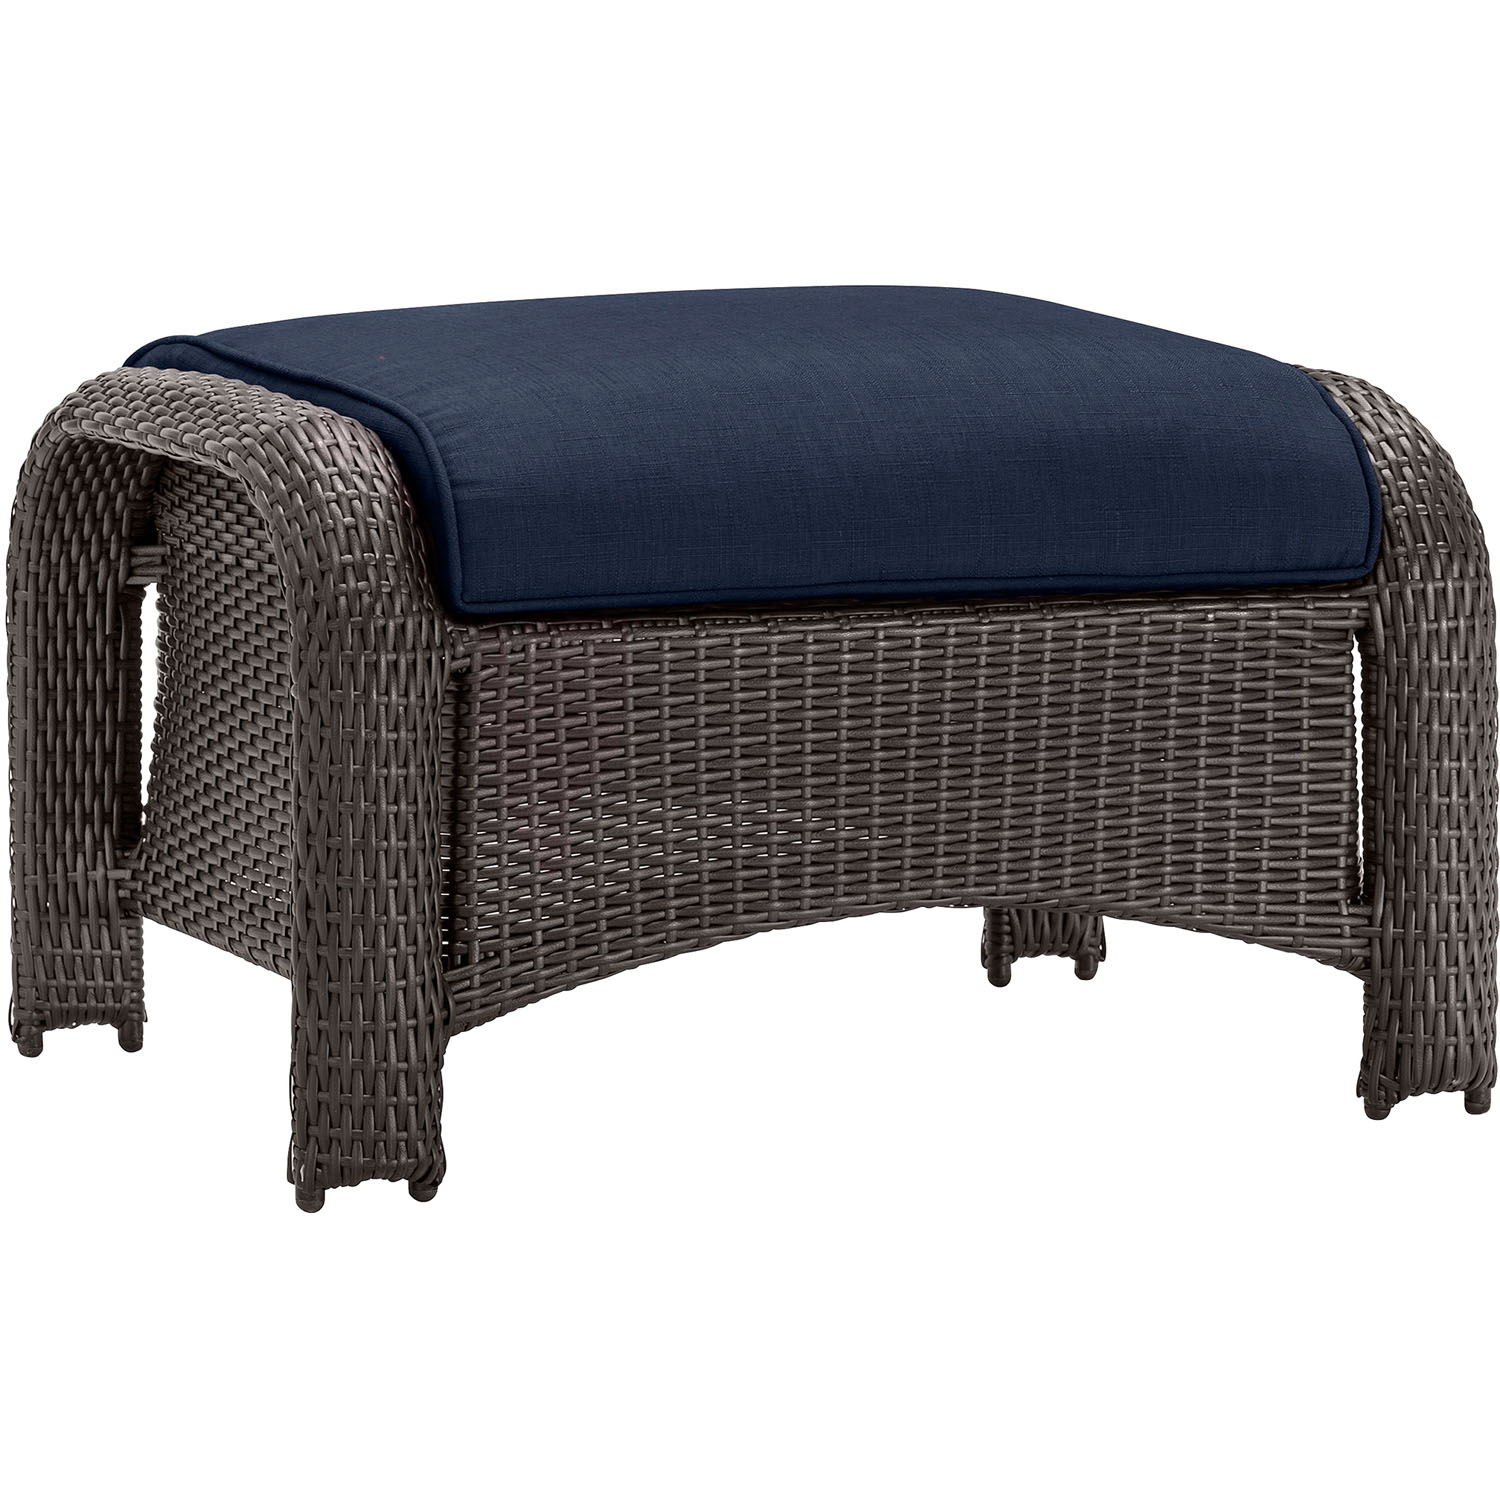 Hanover Strathmere 6-Piece Steel Outdoor Patio Deep Seating Set with Brown Wicker, Navy Blue Cushions, 4 Pillows and Glass Top Rectangular Coffee Table, STRATHMERE6PCNVY - image 5 of 18